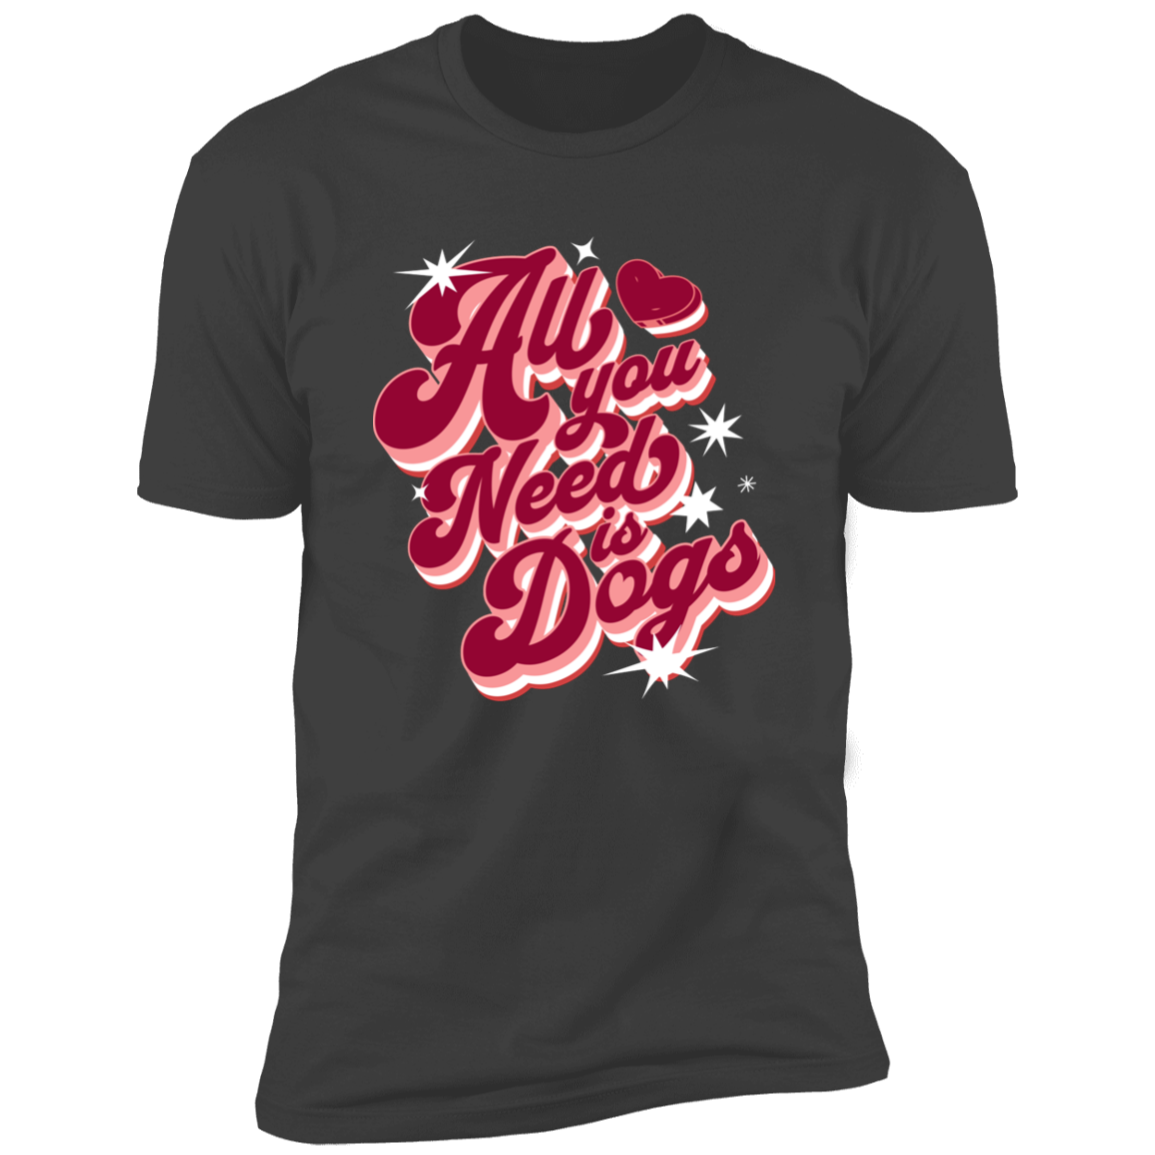 All I Need is Dogs T-shirt, Dog Shirt for humans, in heavy metal gray